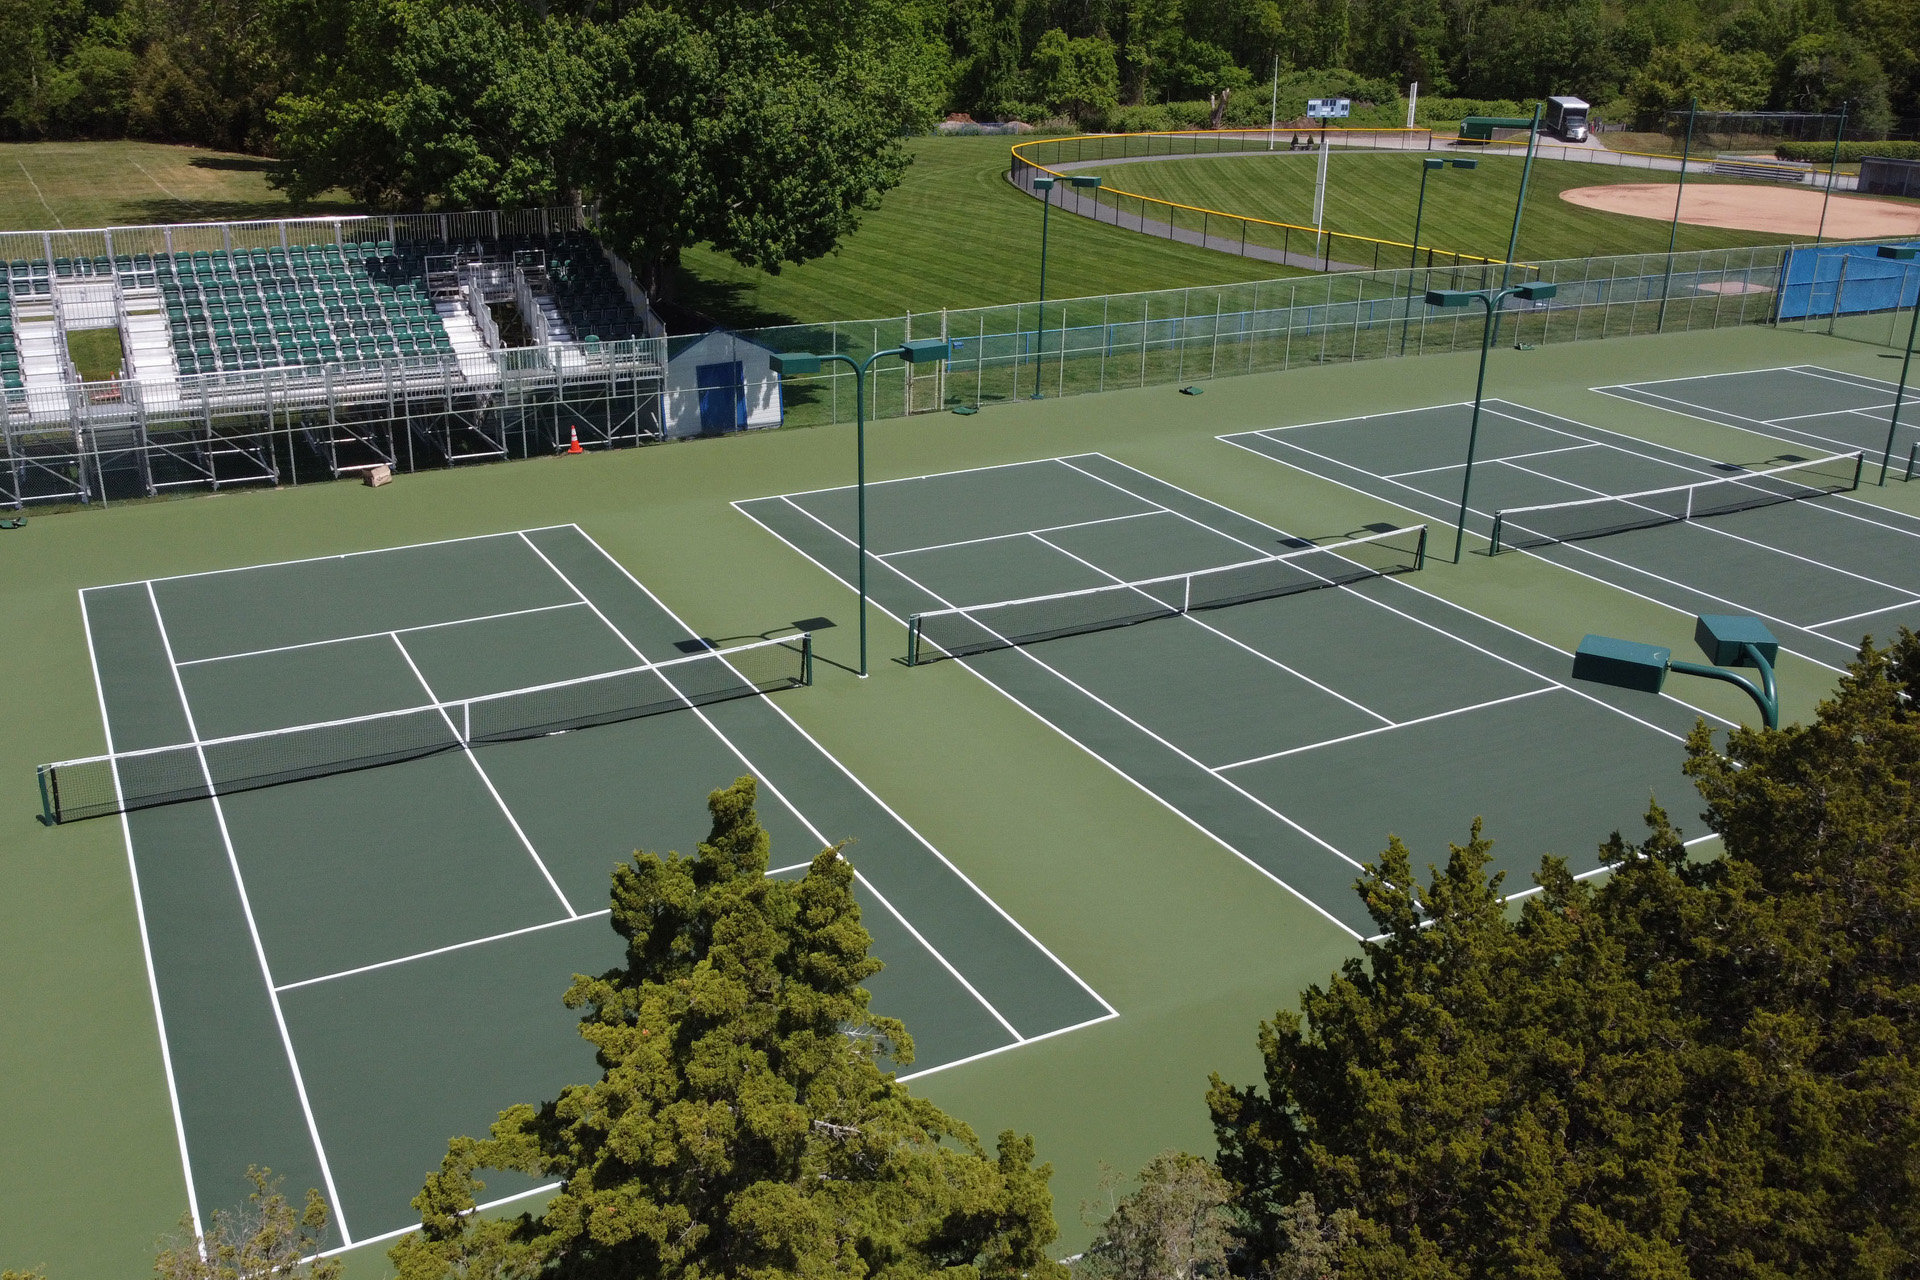 Tennis courts at Wheaton College